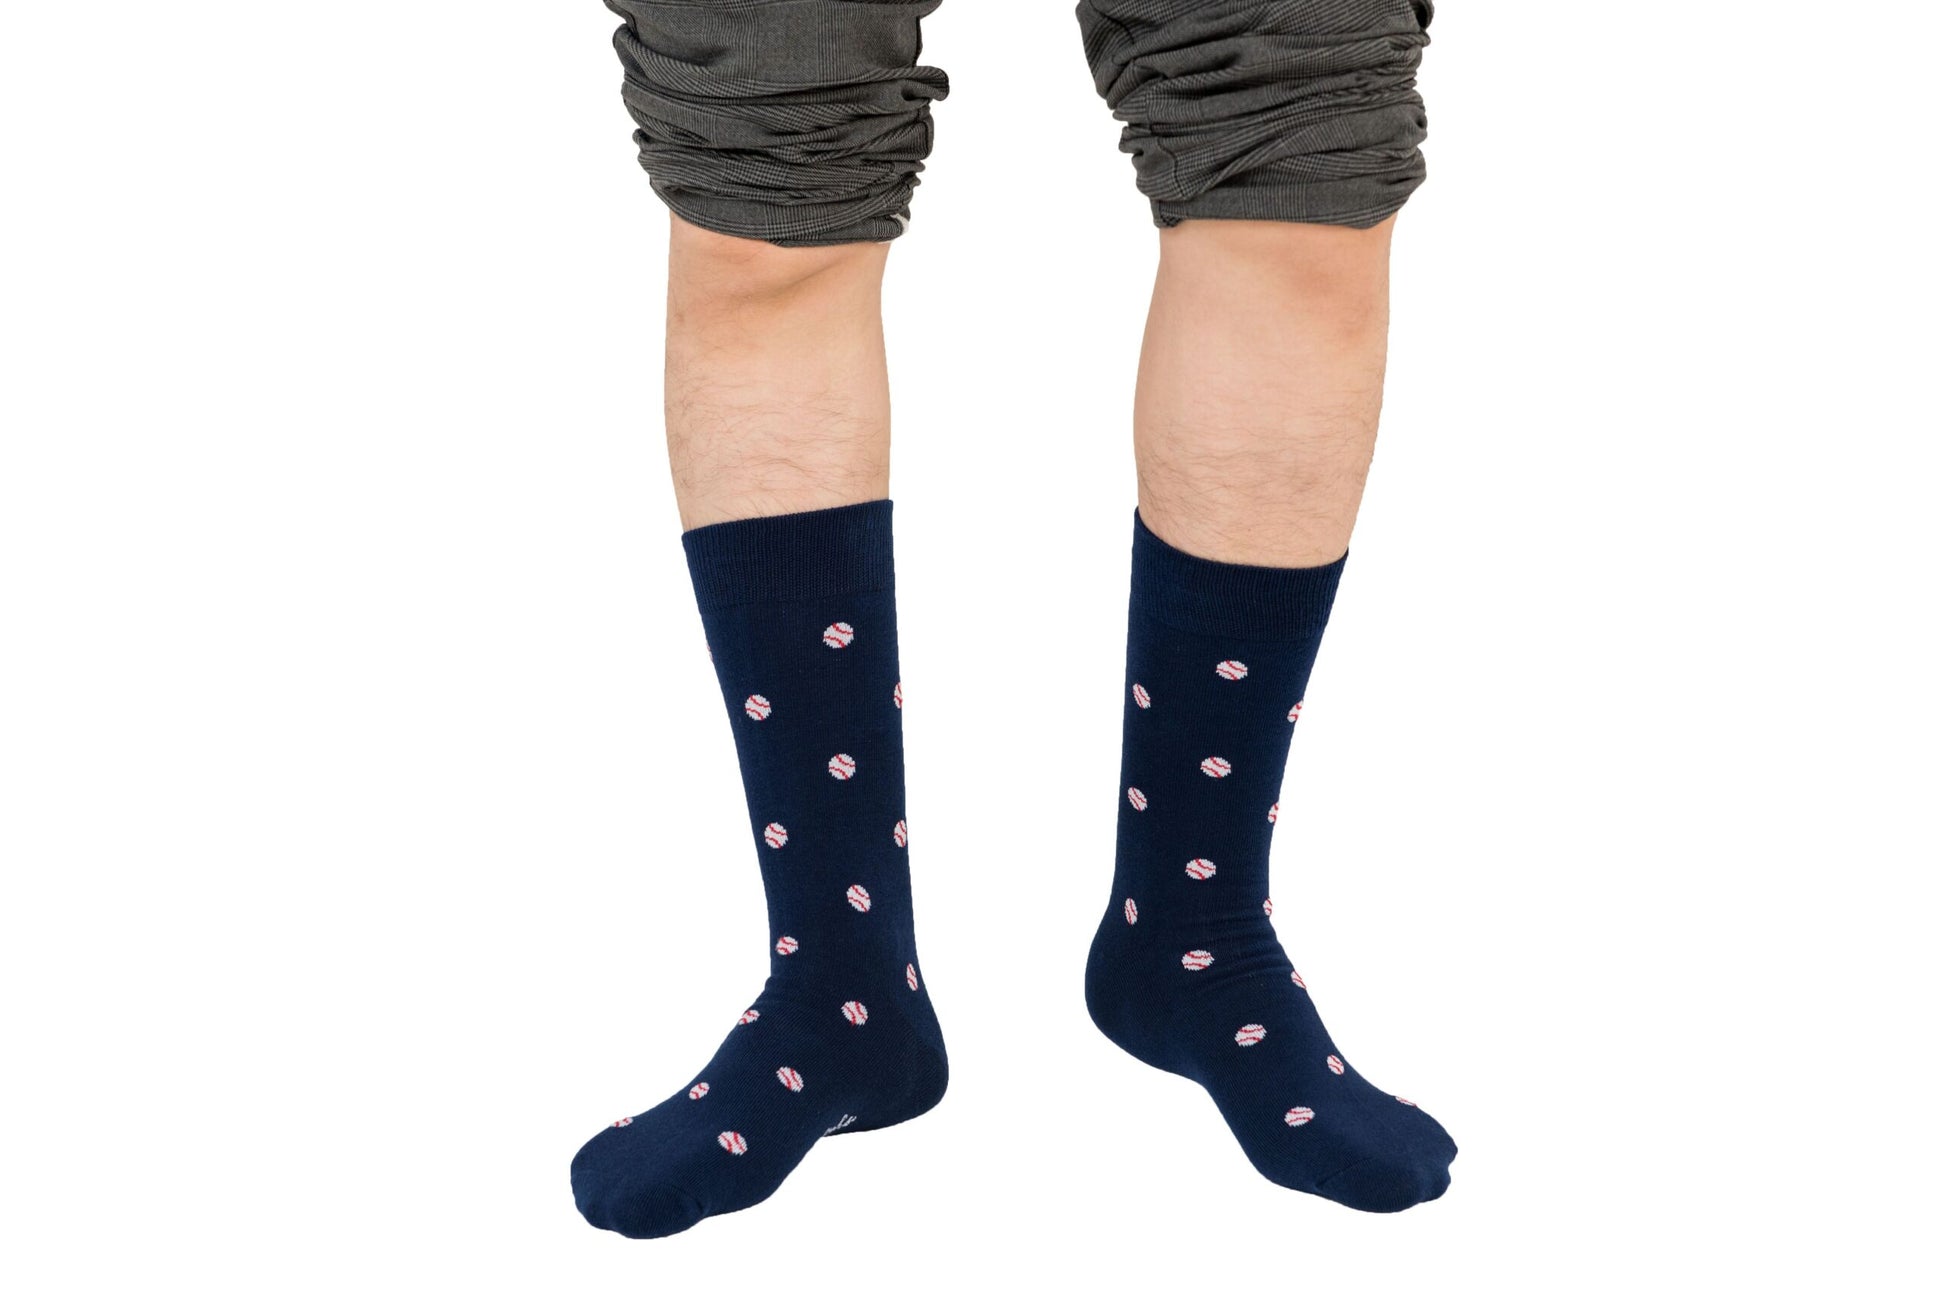 A person's legs adorned with baseball socks.